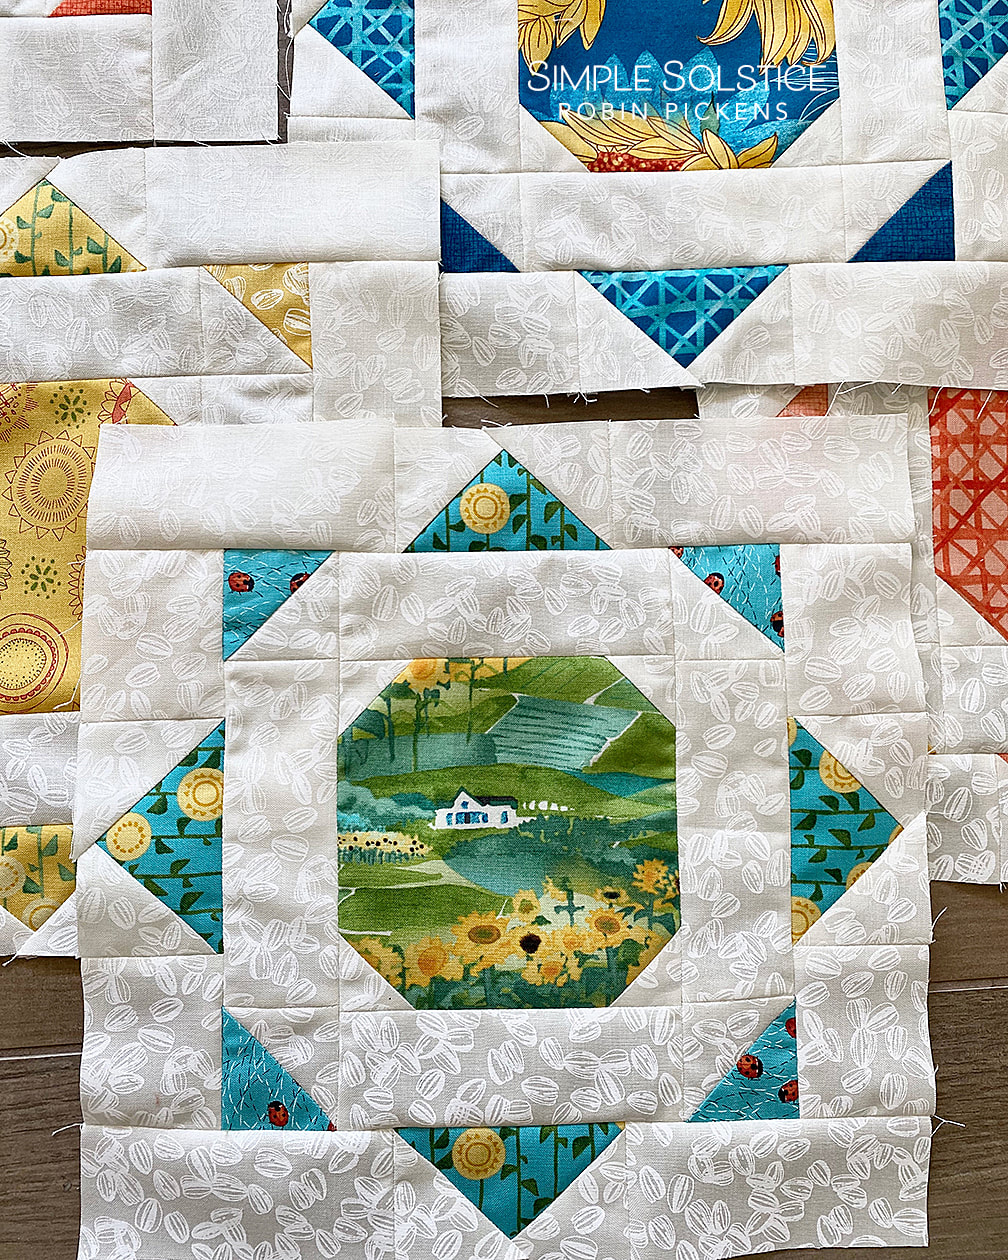 Simple Solstice quilt blocks use HST, flying geese and stitch and flip.